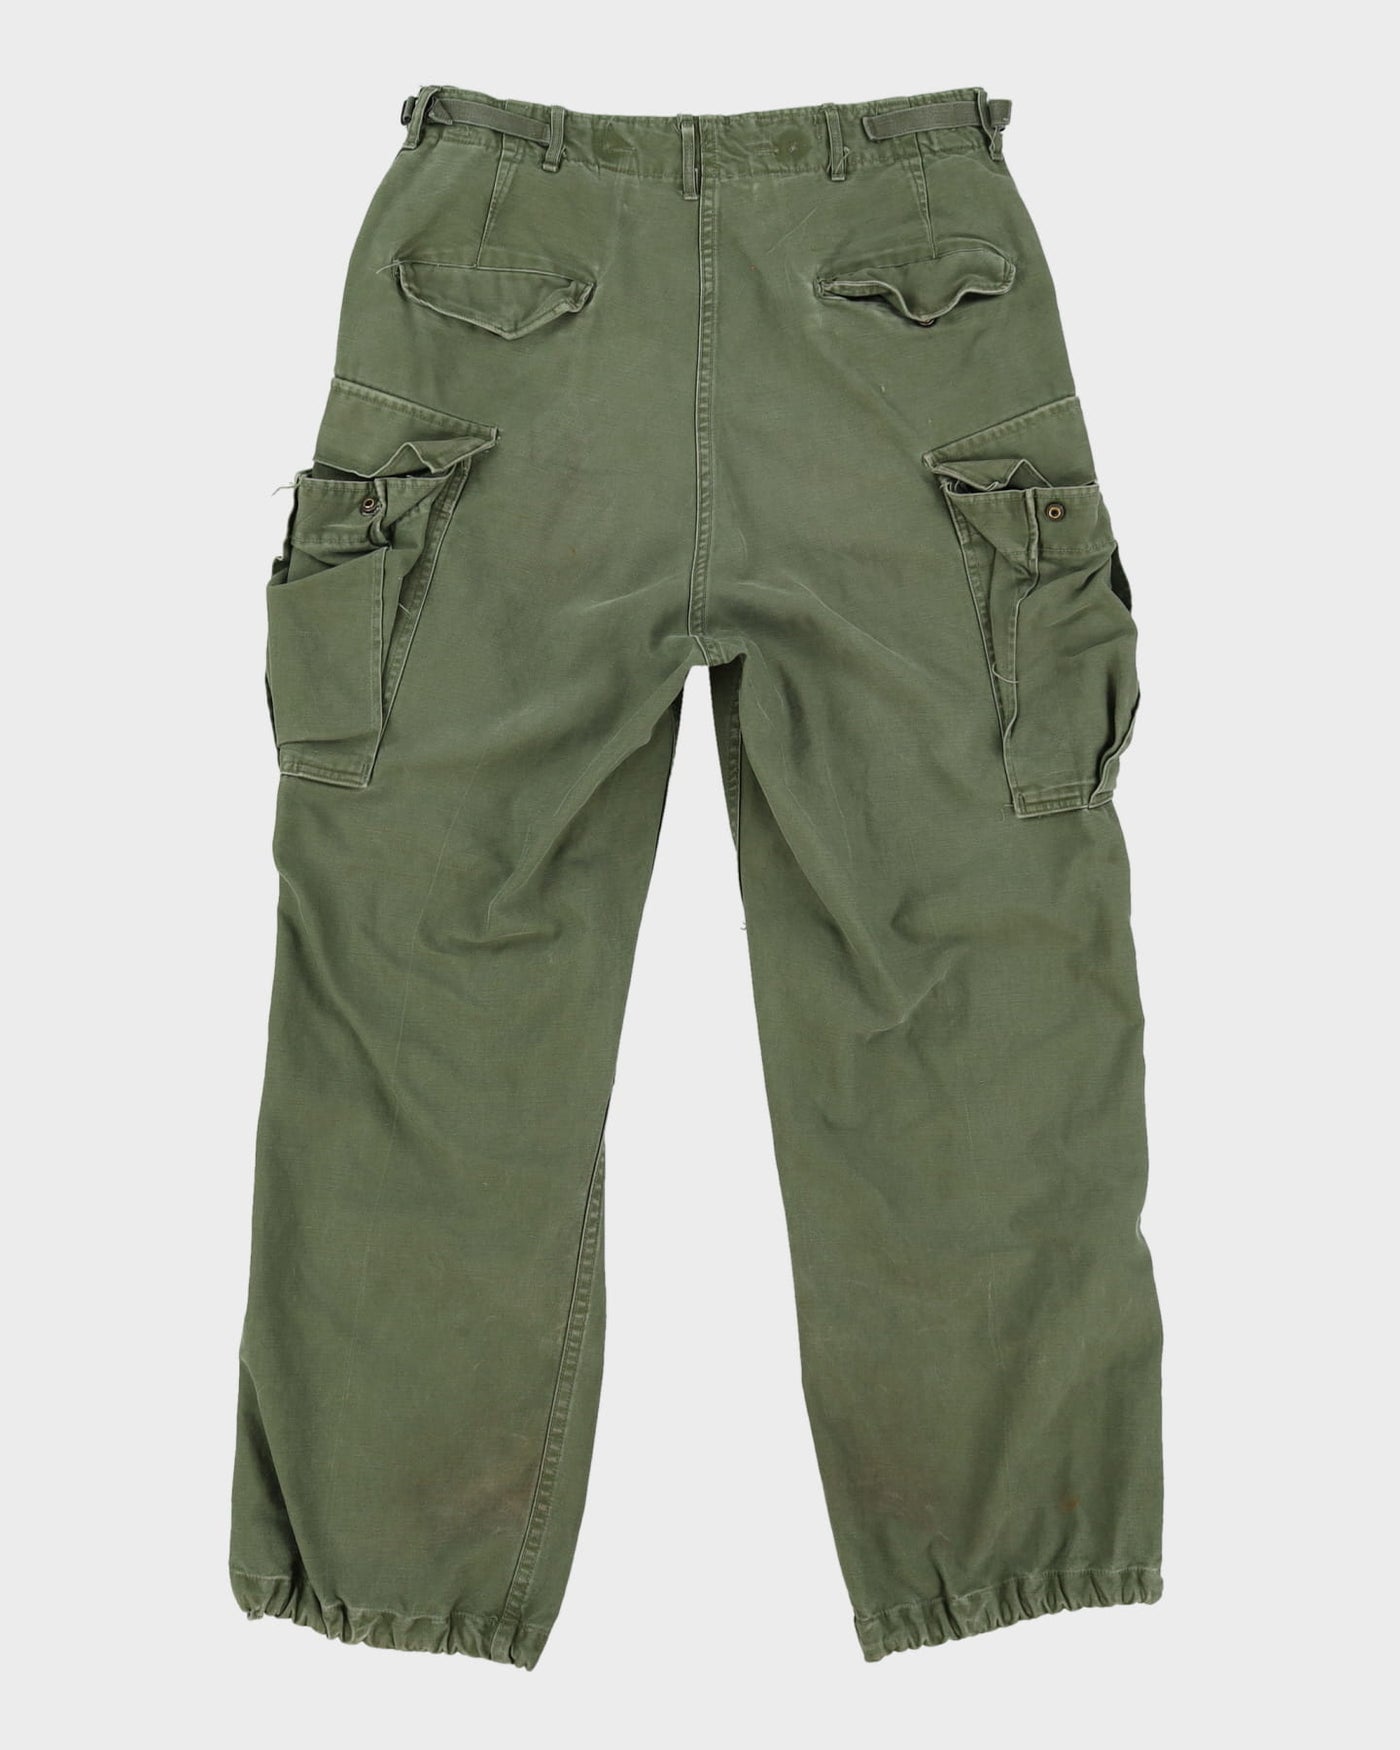 1950s Vintage US Army M51 Cold Weather Trousers - 30x28